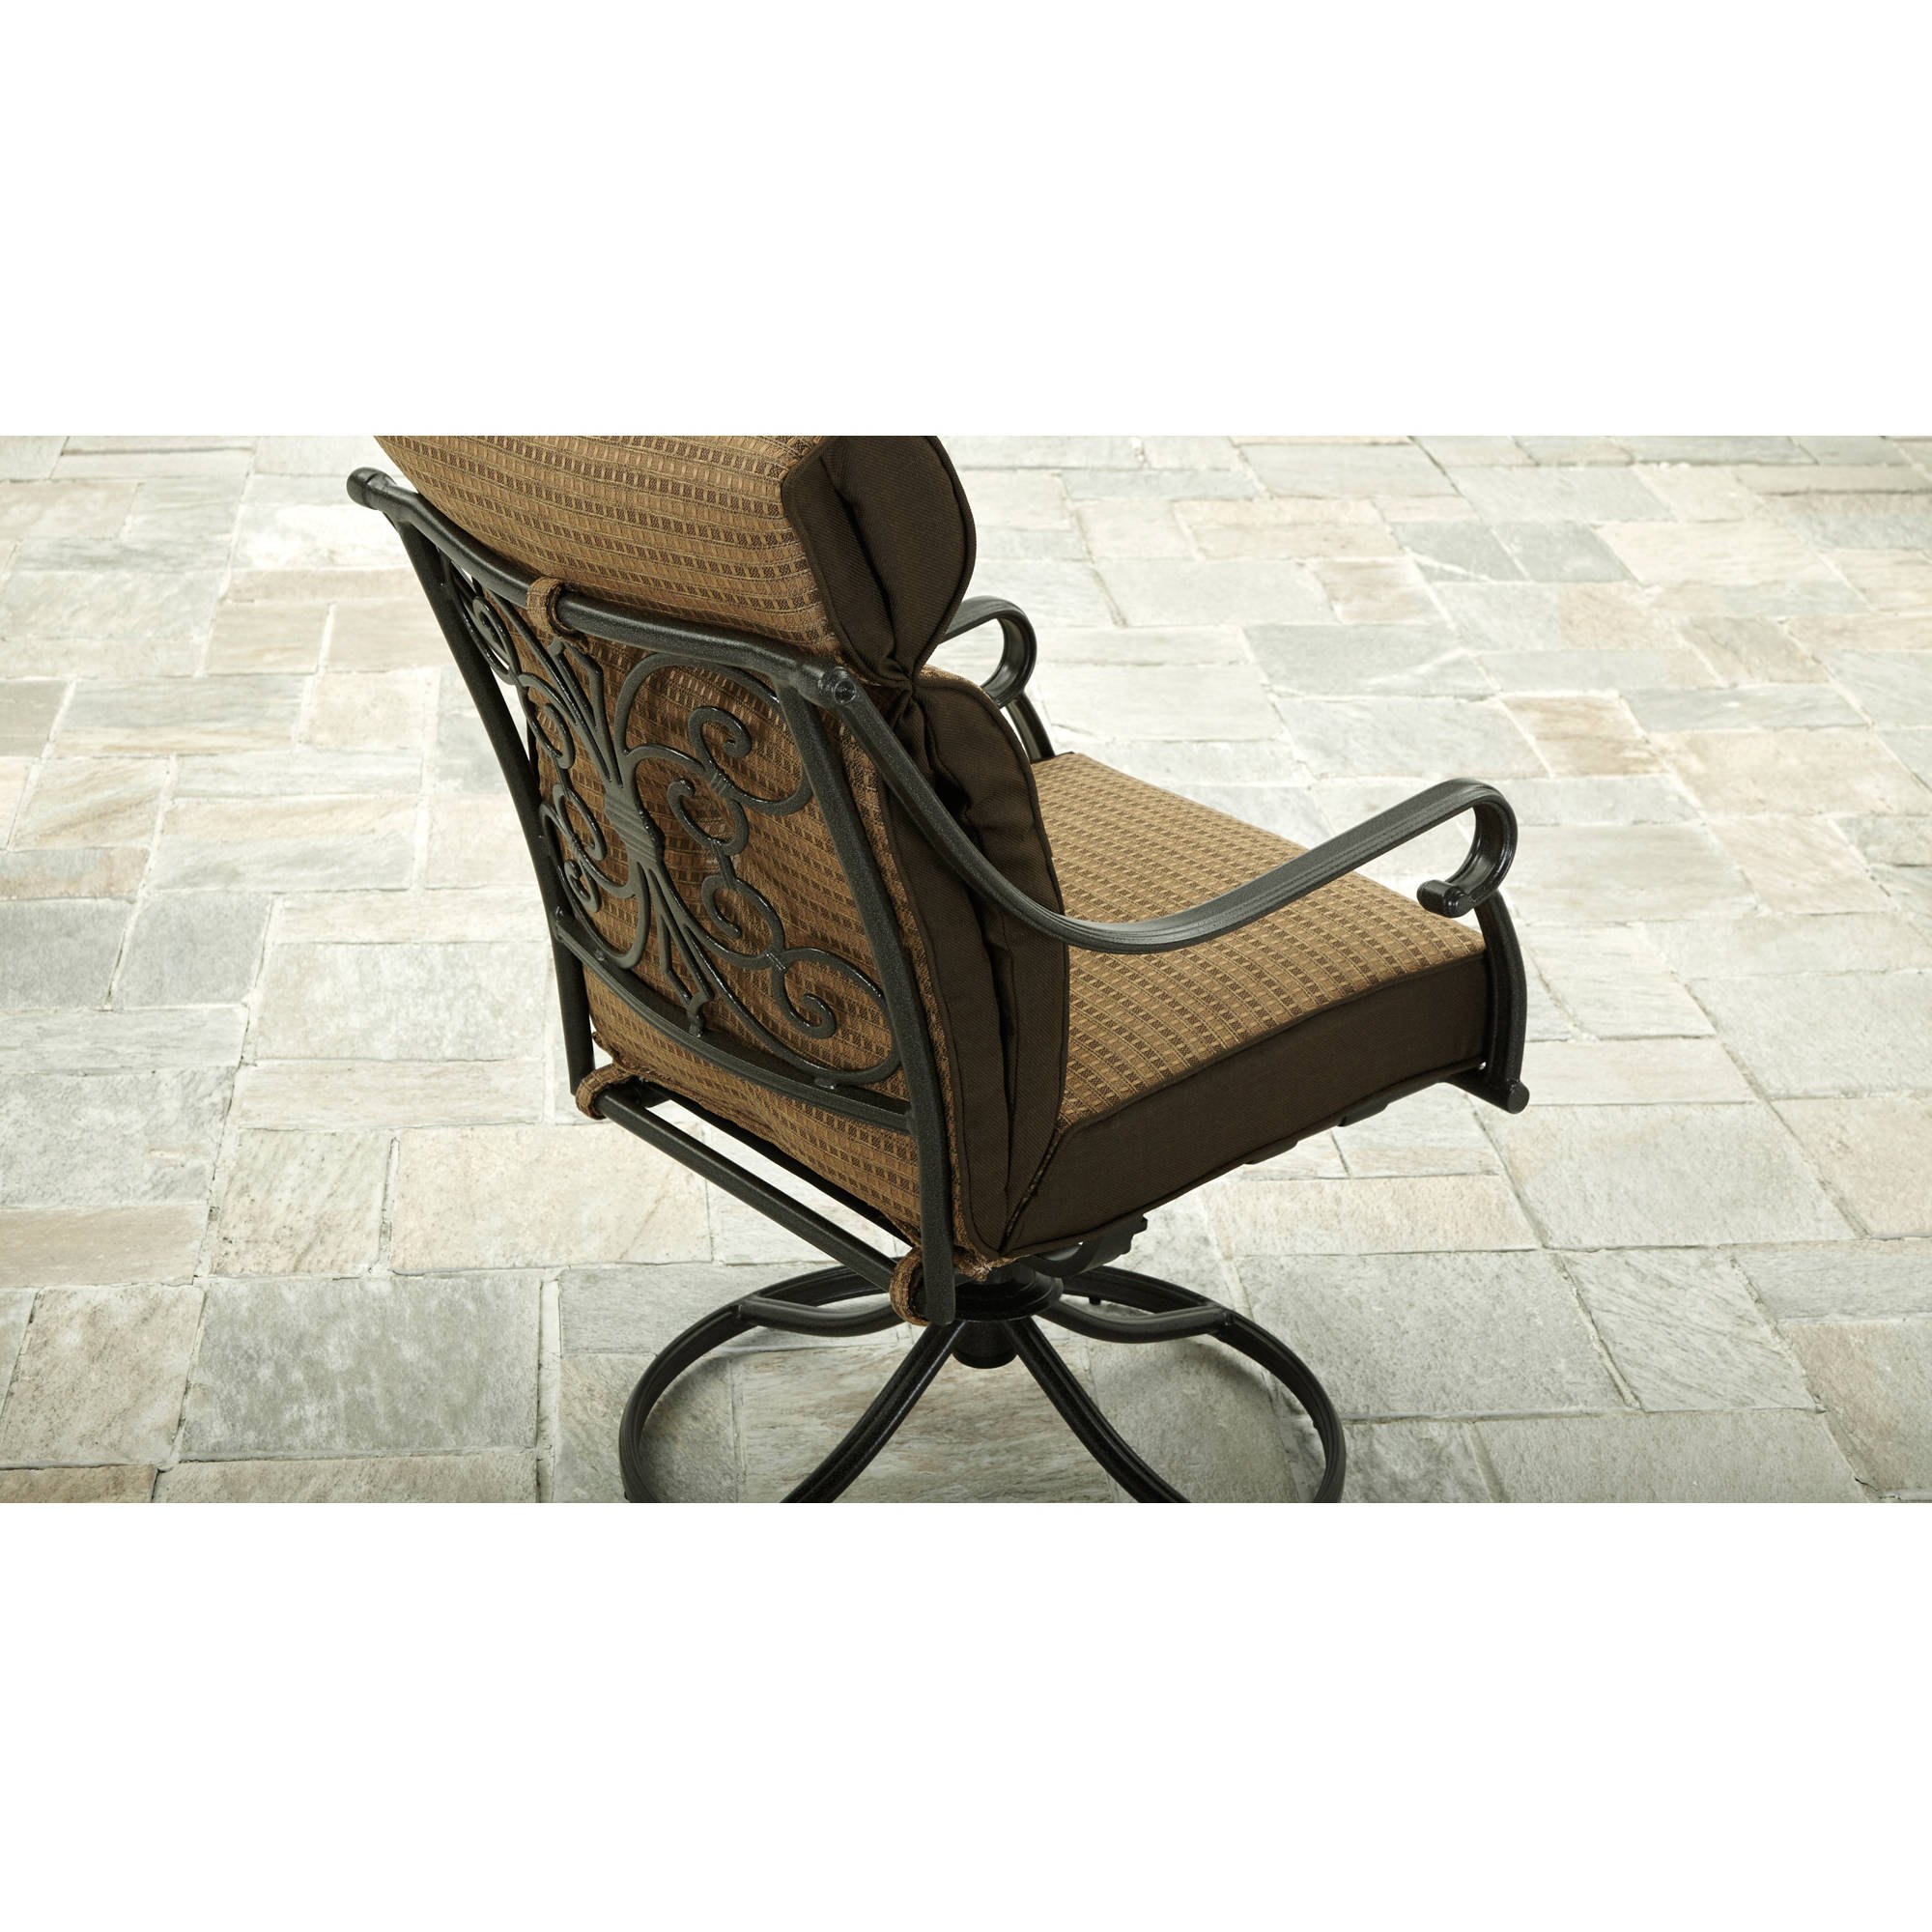 Better Homes and Gardens Bailey Ridge Outdoor Dining Chairs, Set of 4, Table NOT included - image 2 of 8